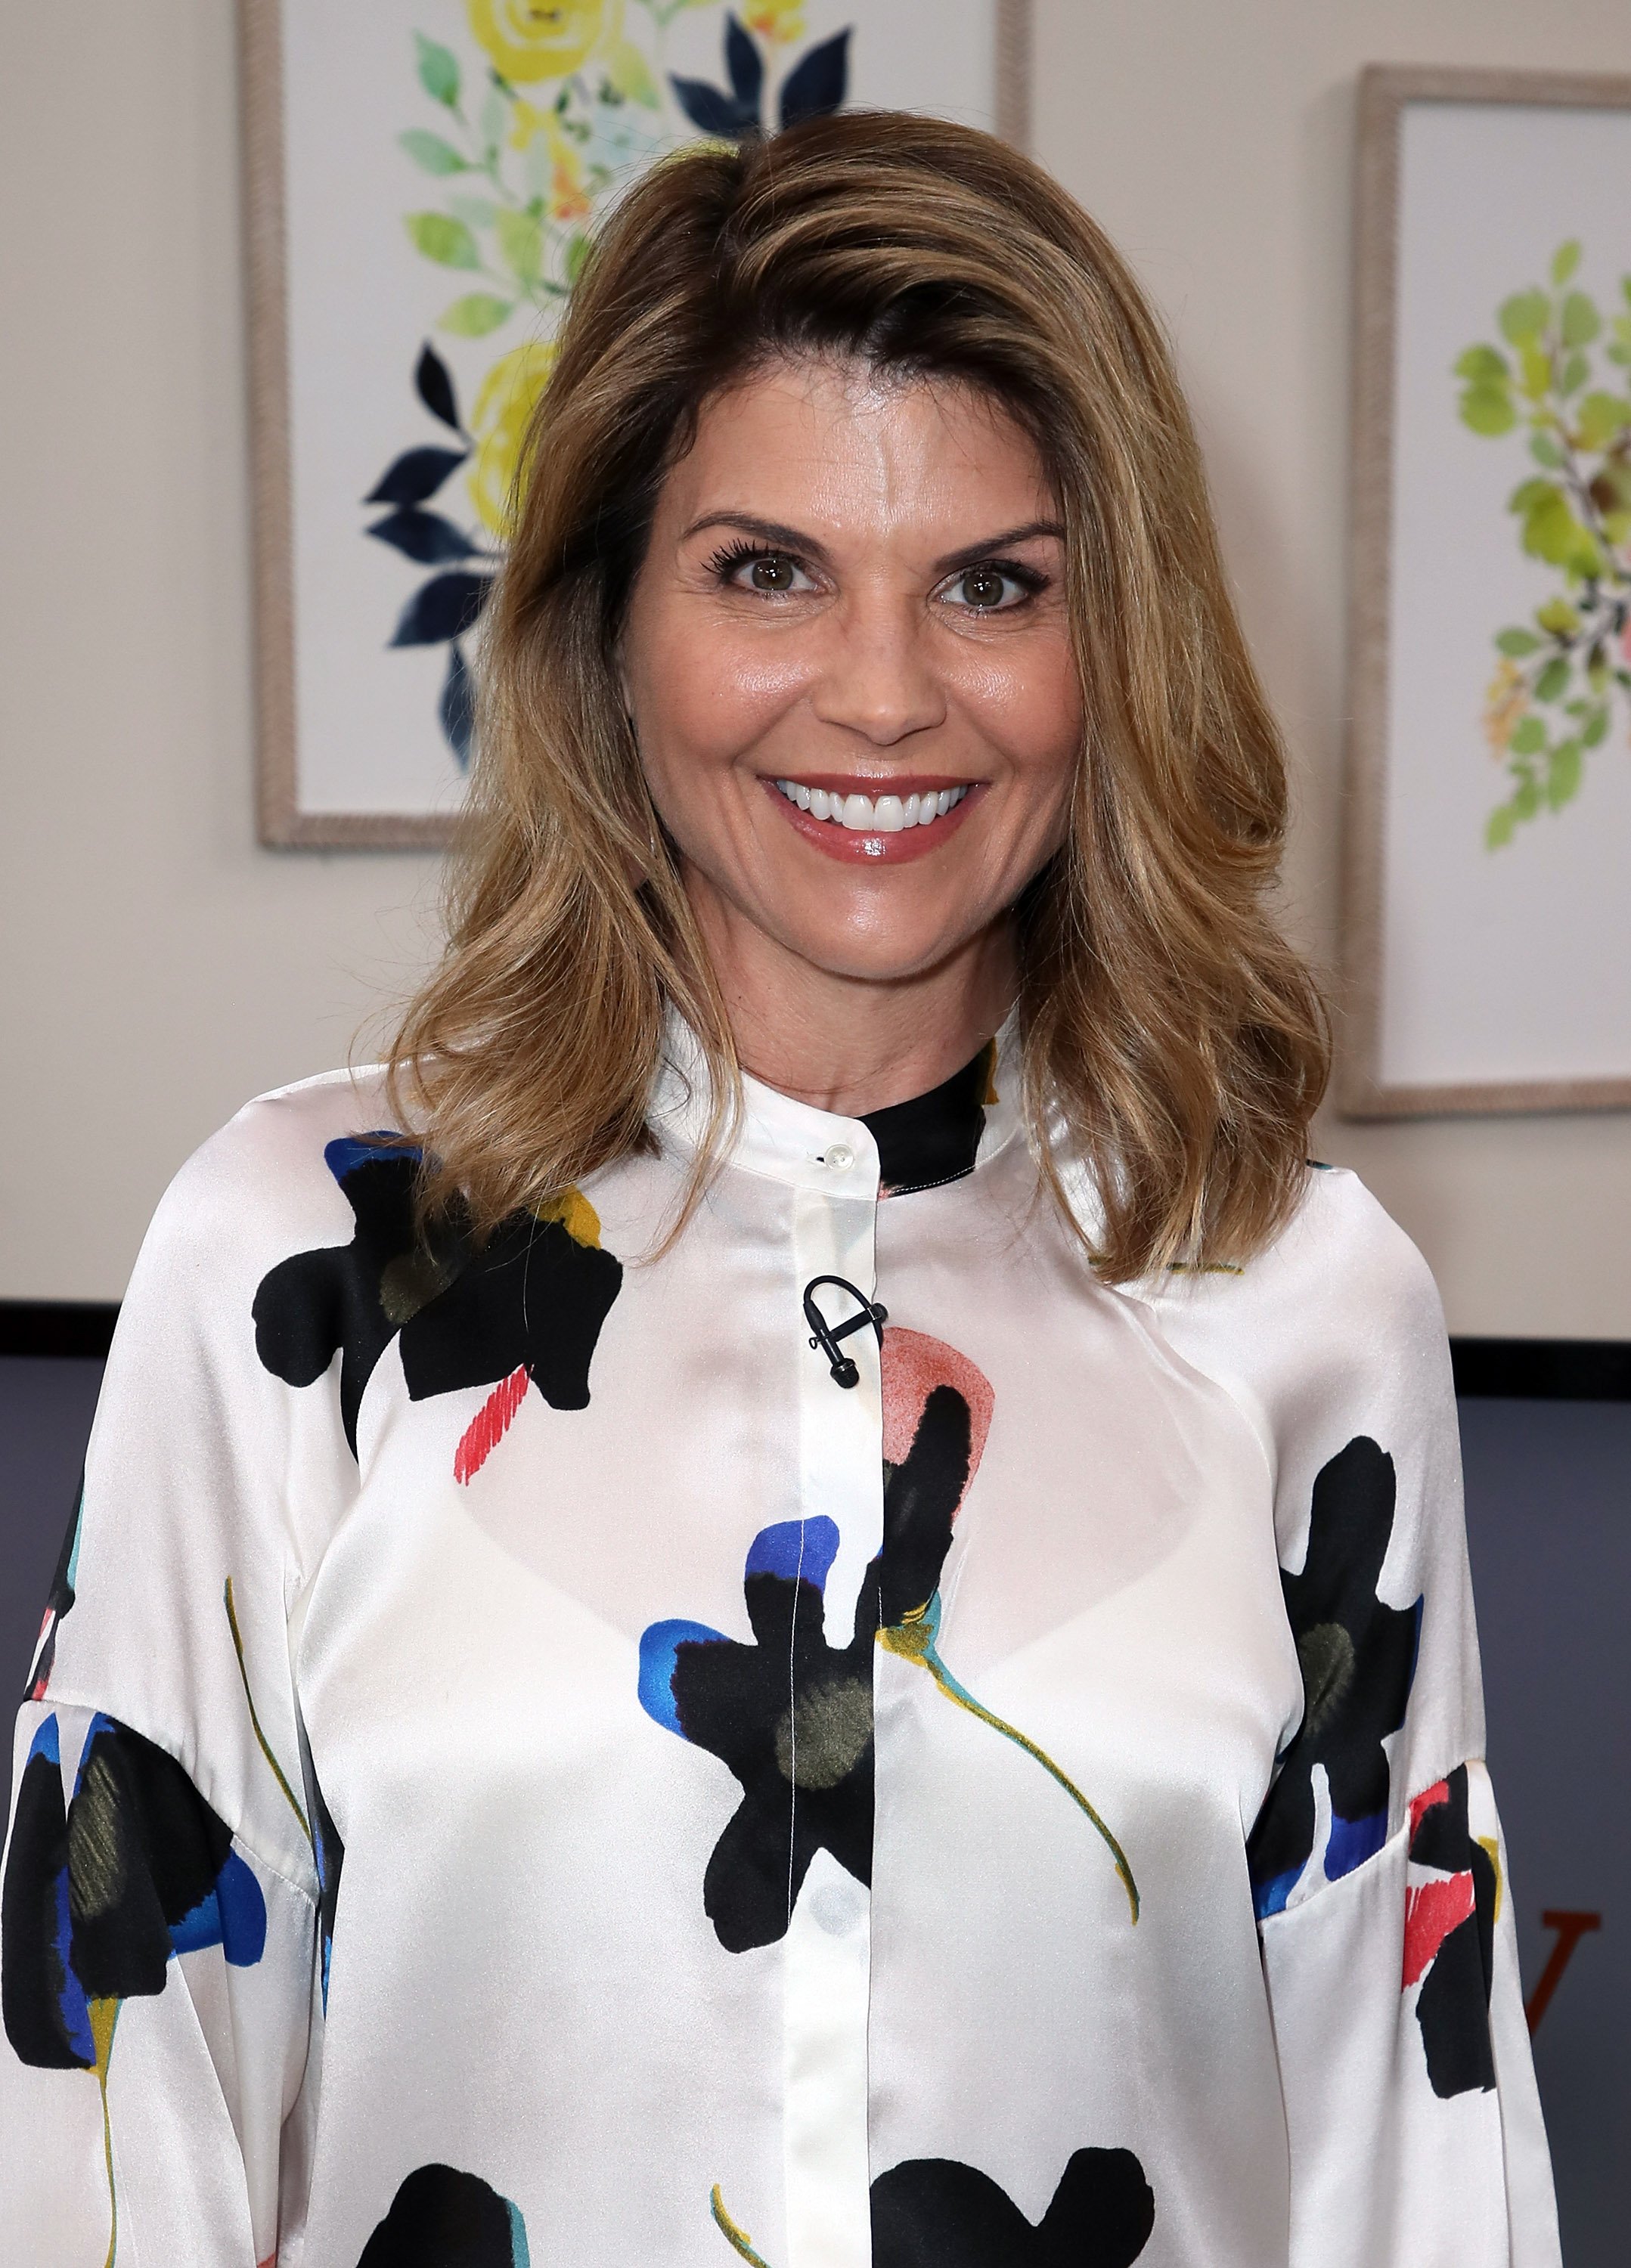 Lori Loughlin visitng Hallmark's 'Home & Family' at Universal Studios Hollywood in Universal City, California | Photo: Getty Images